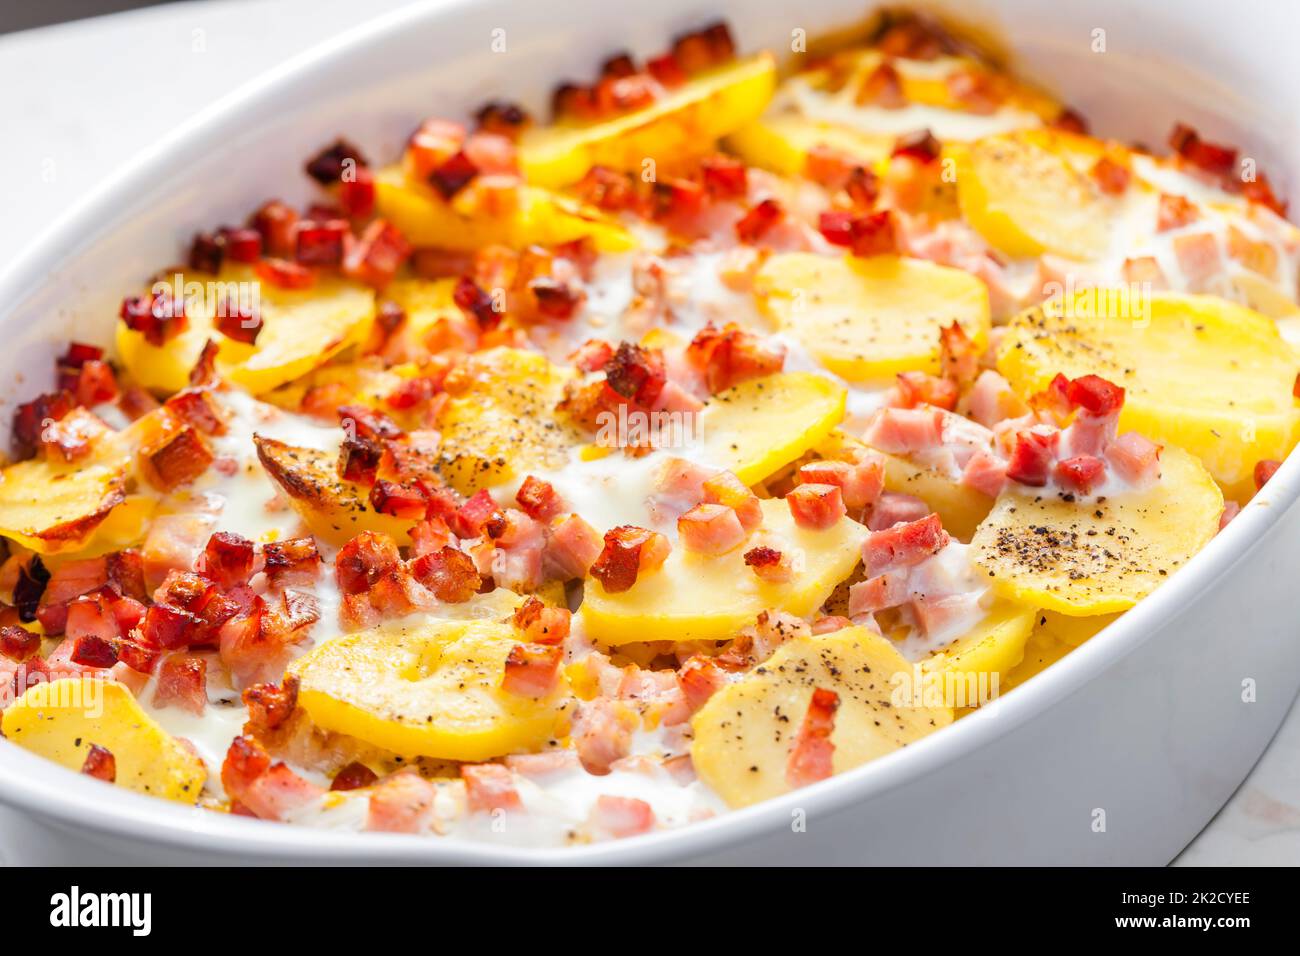 baked potatoes with bacon and eggs Stock Photo